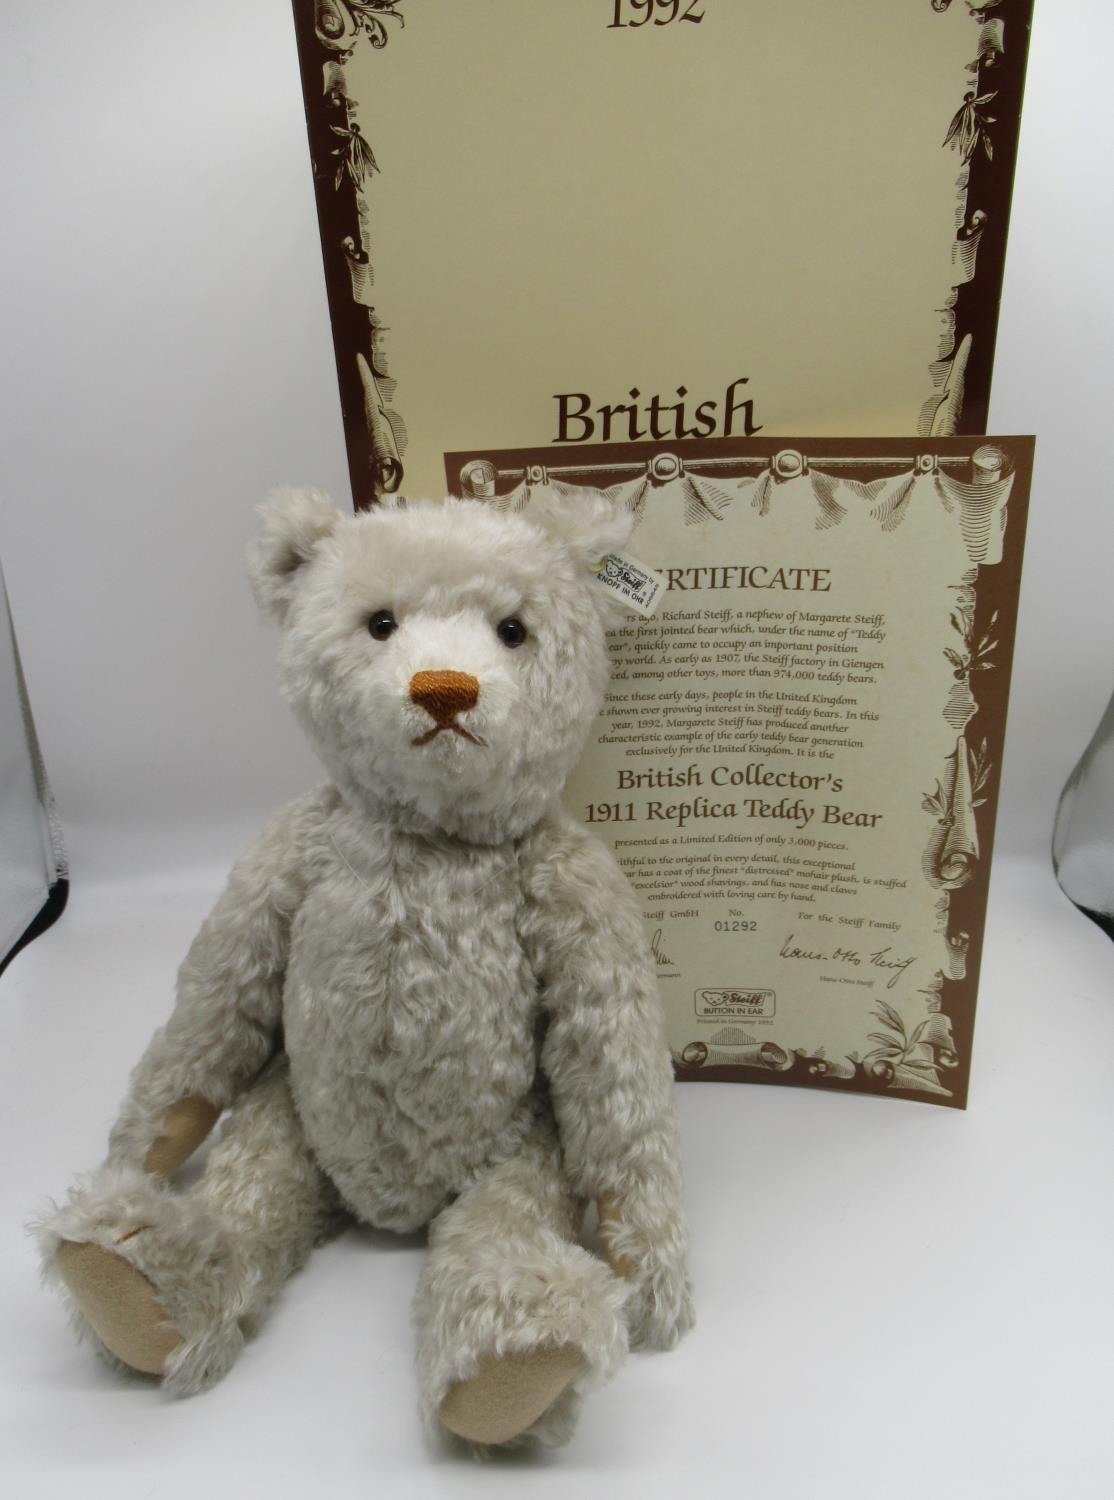 Steiff Excelsior Stuffed Mohair Teddy Bear with Growler for Sale -   - Antique Toys for Sale